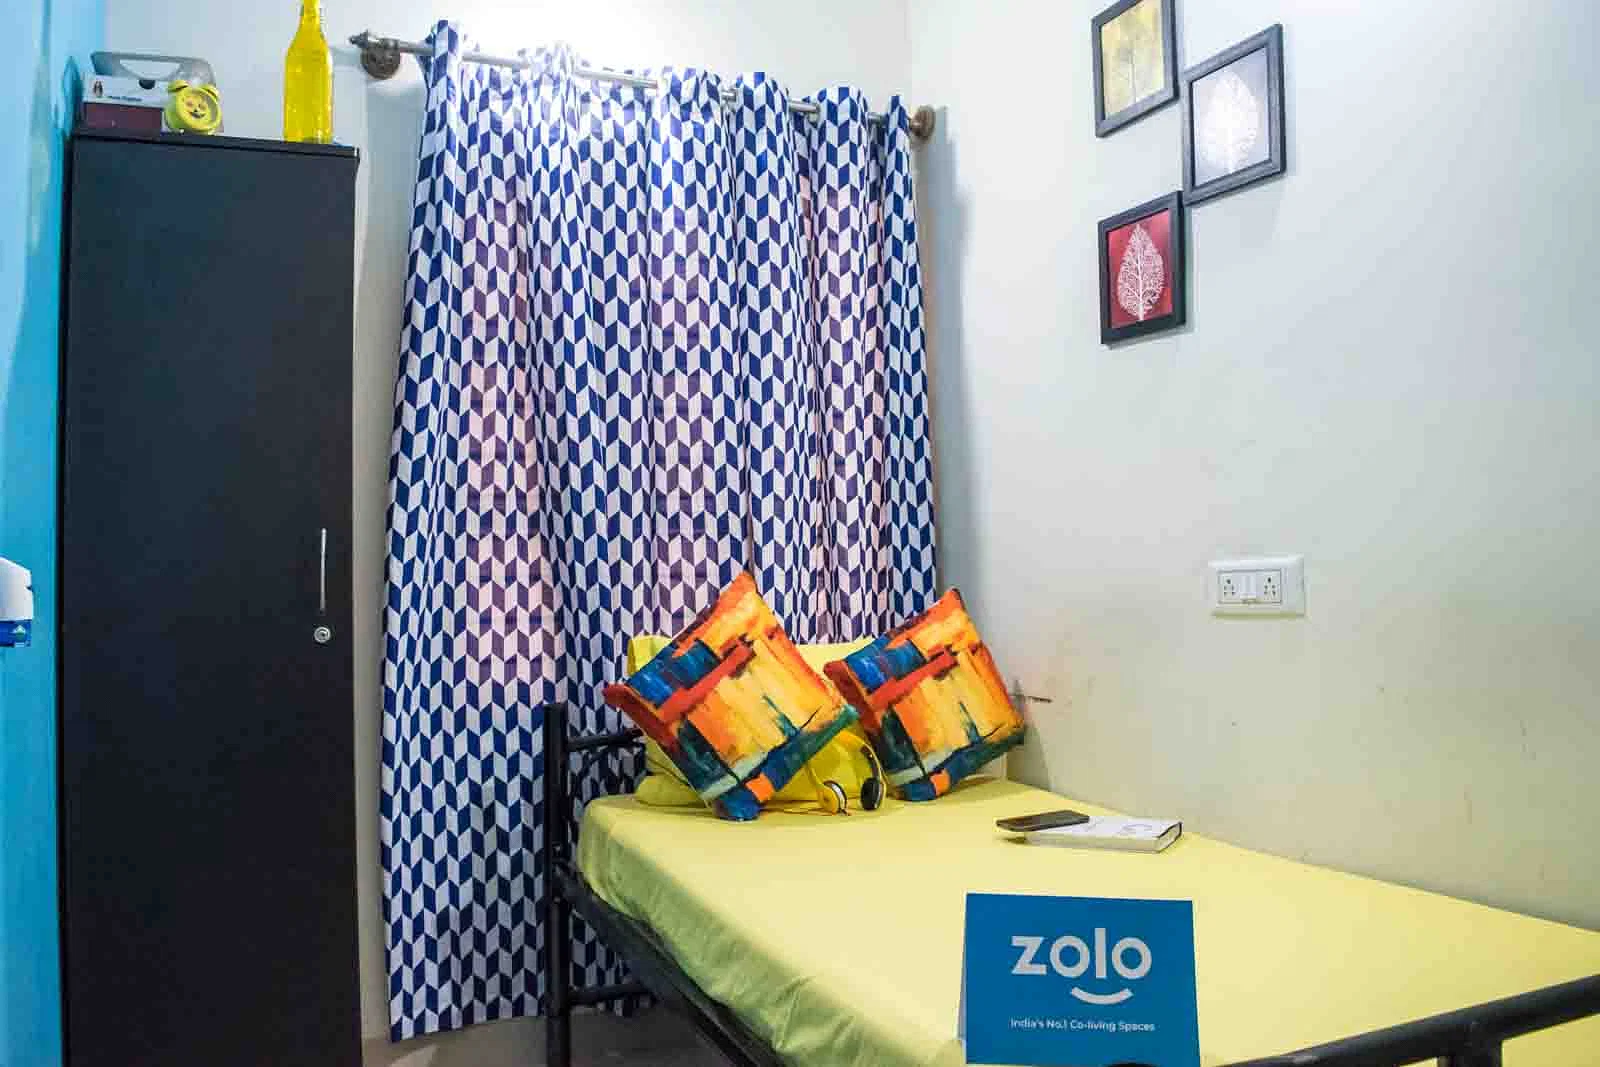 budget-friendly PGs and hostels for boys and girls with single rooms with daily hopusekeeping-Zolo Park View